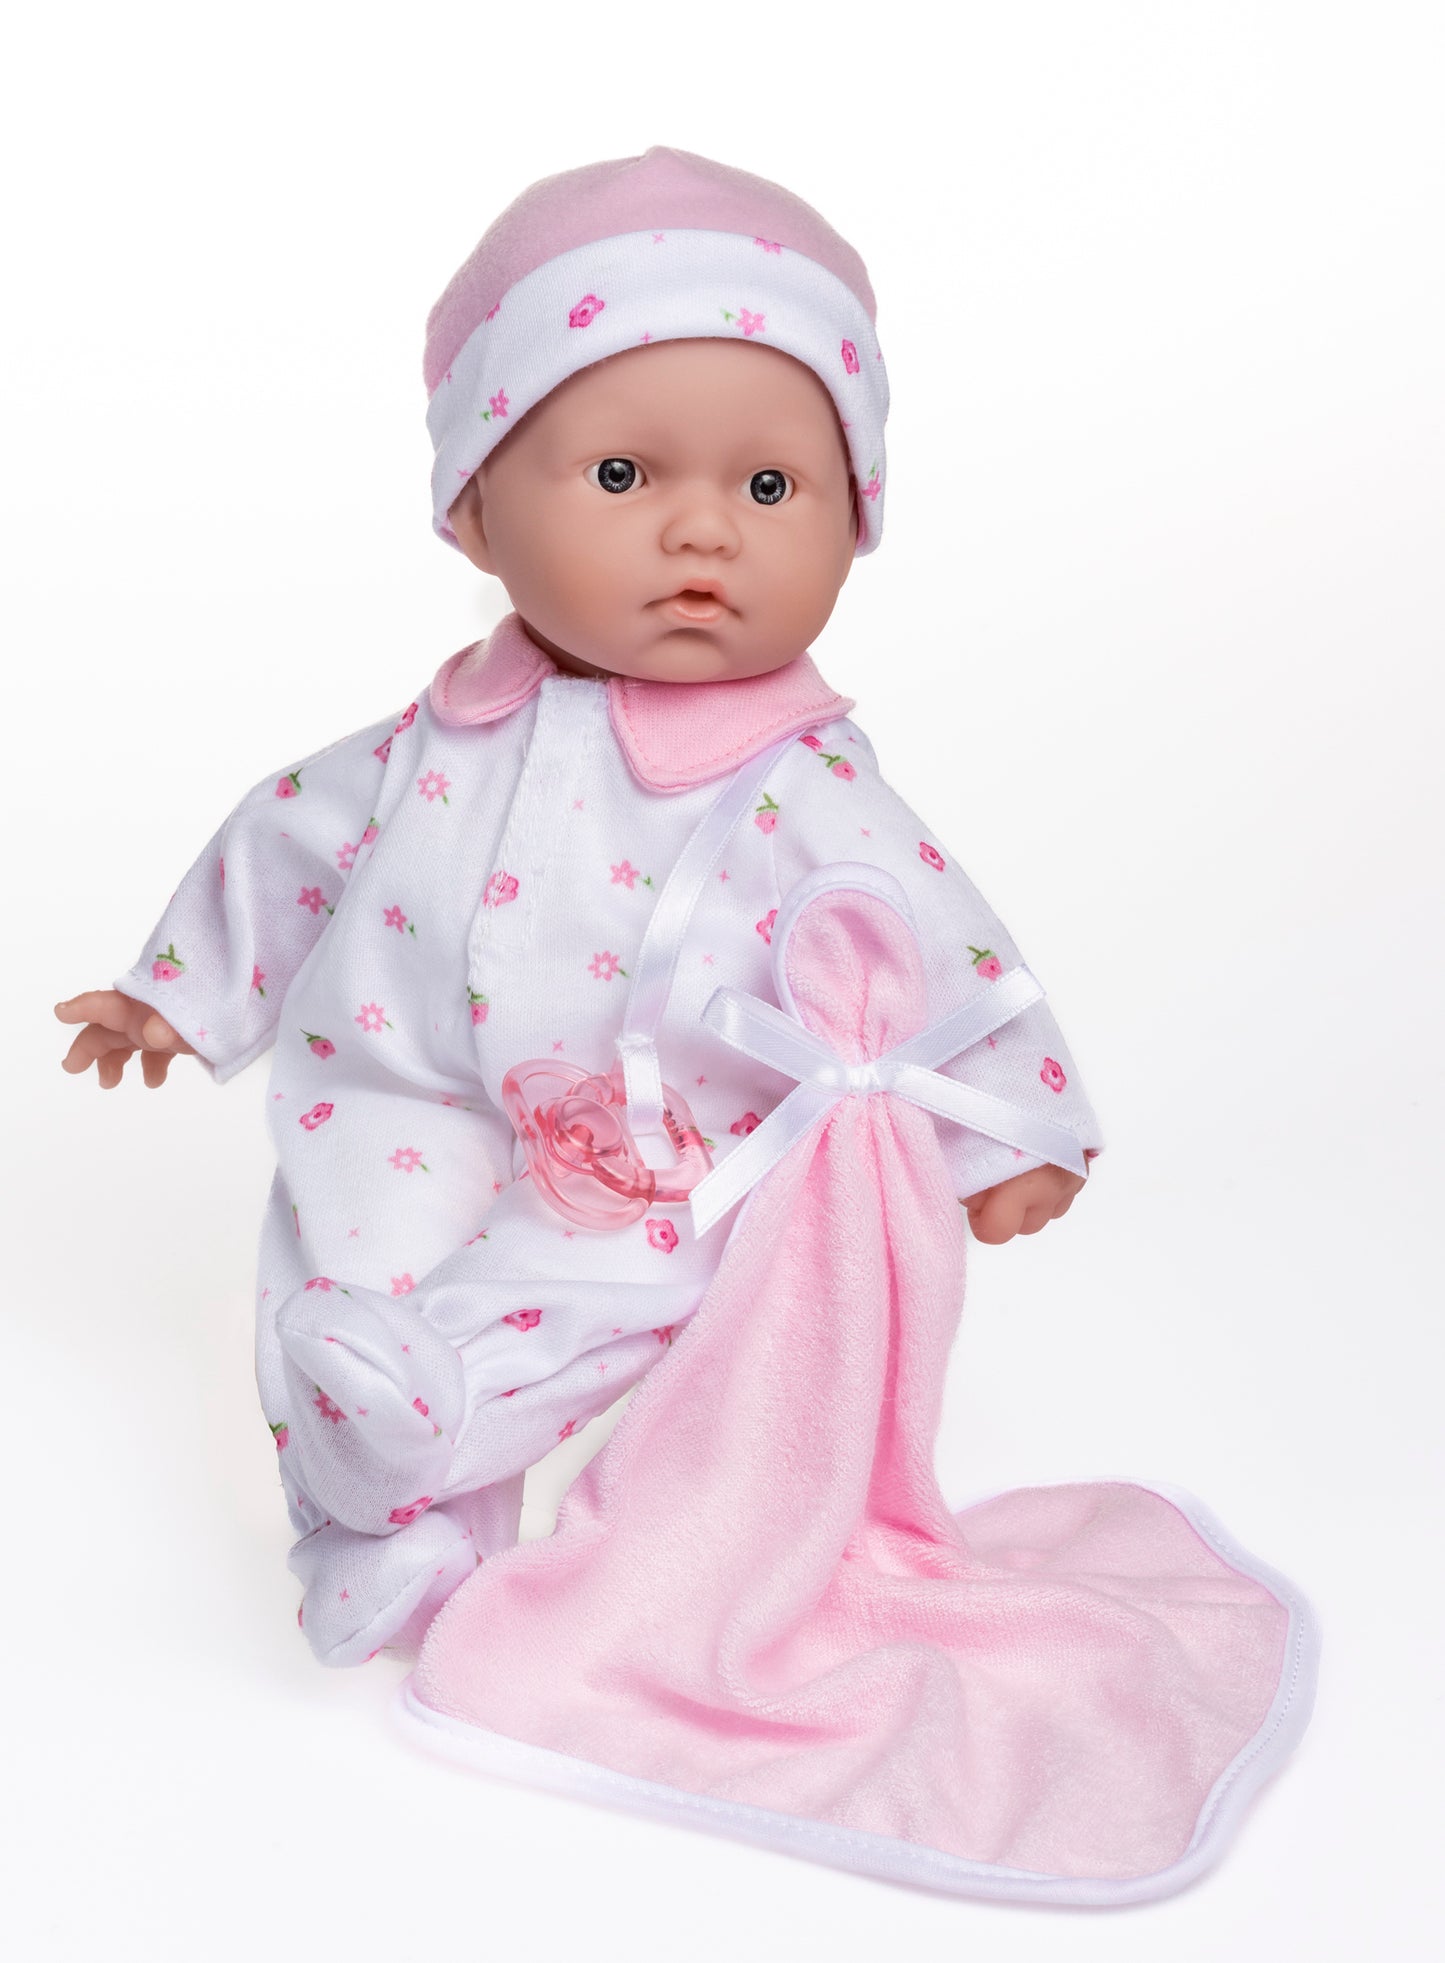 JC Toys, La Baby 11 inch Soft Body Baby Doll in Pink With Realistic Features